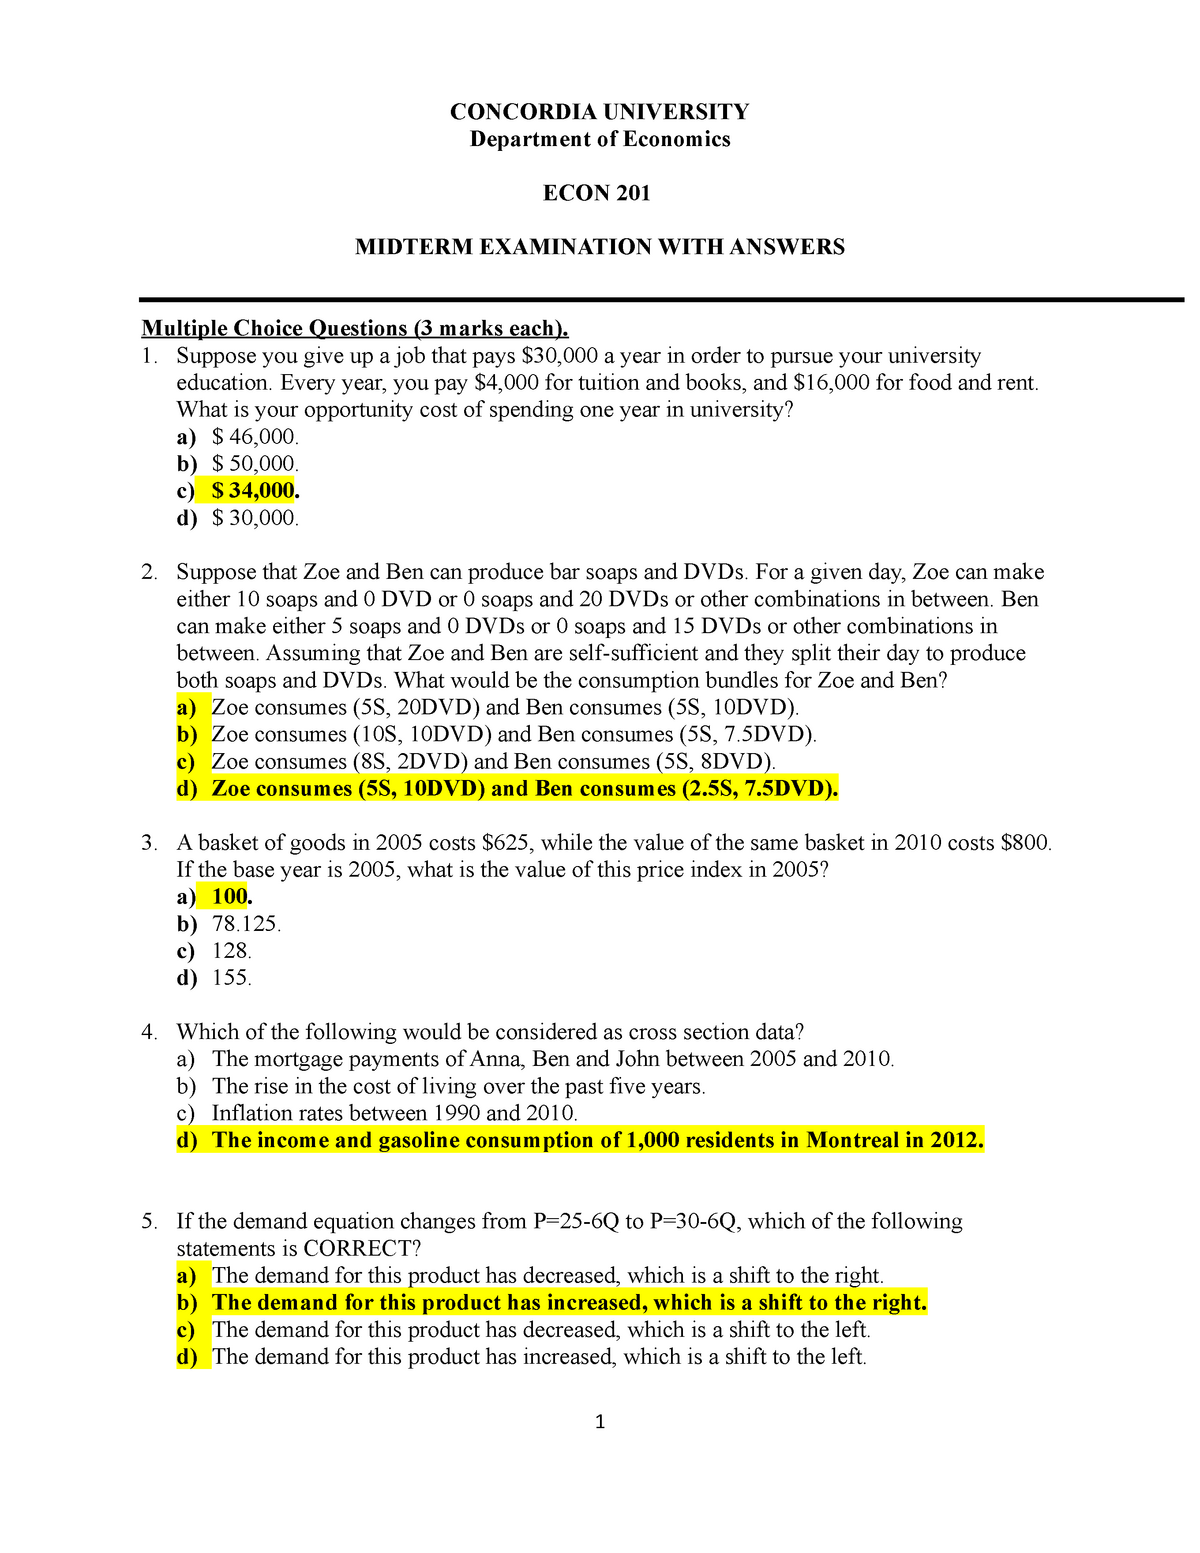 Midterm Exam October 2014, Questions and answers StuDocu